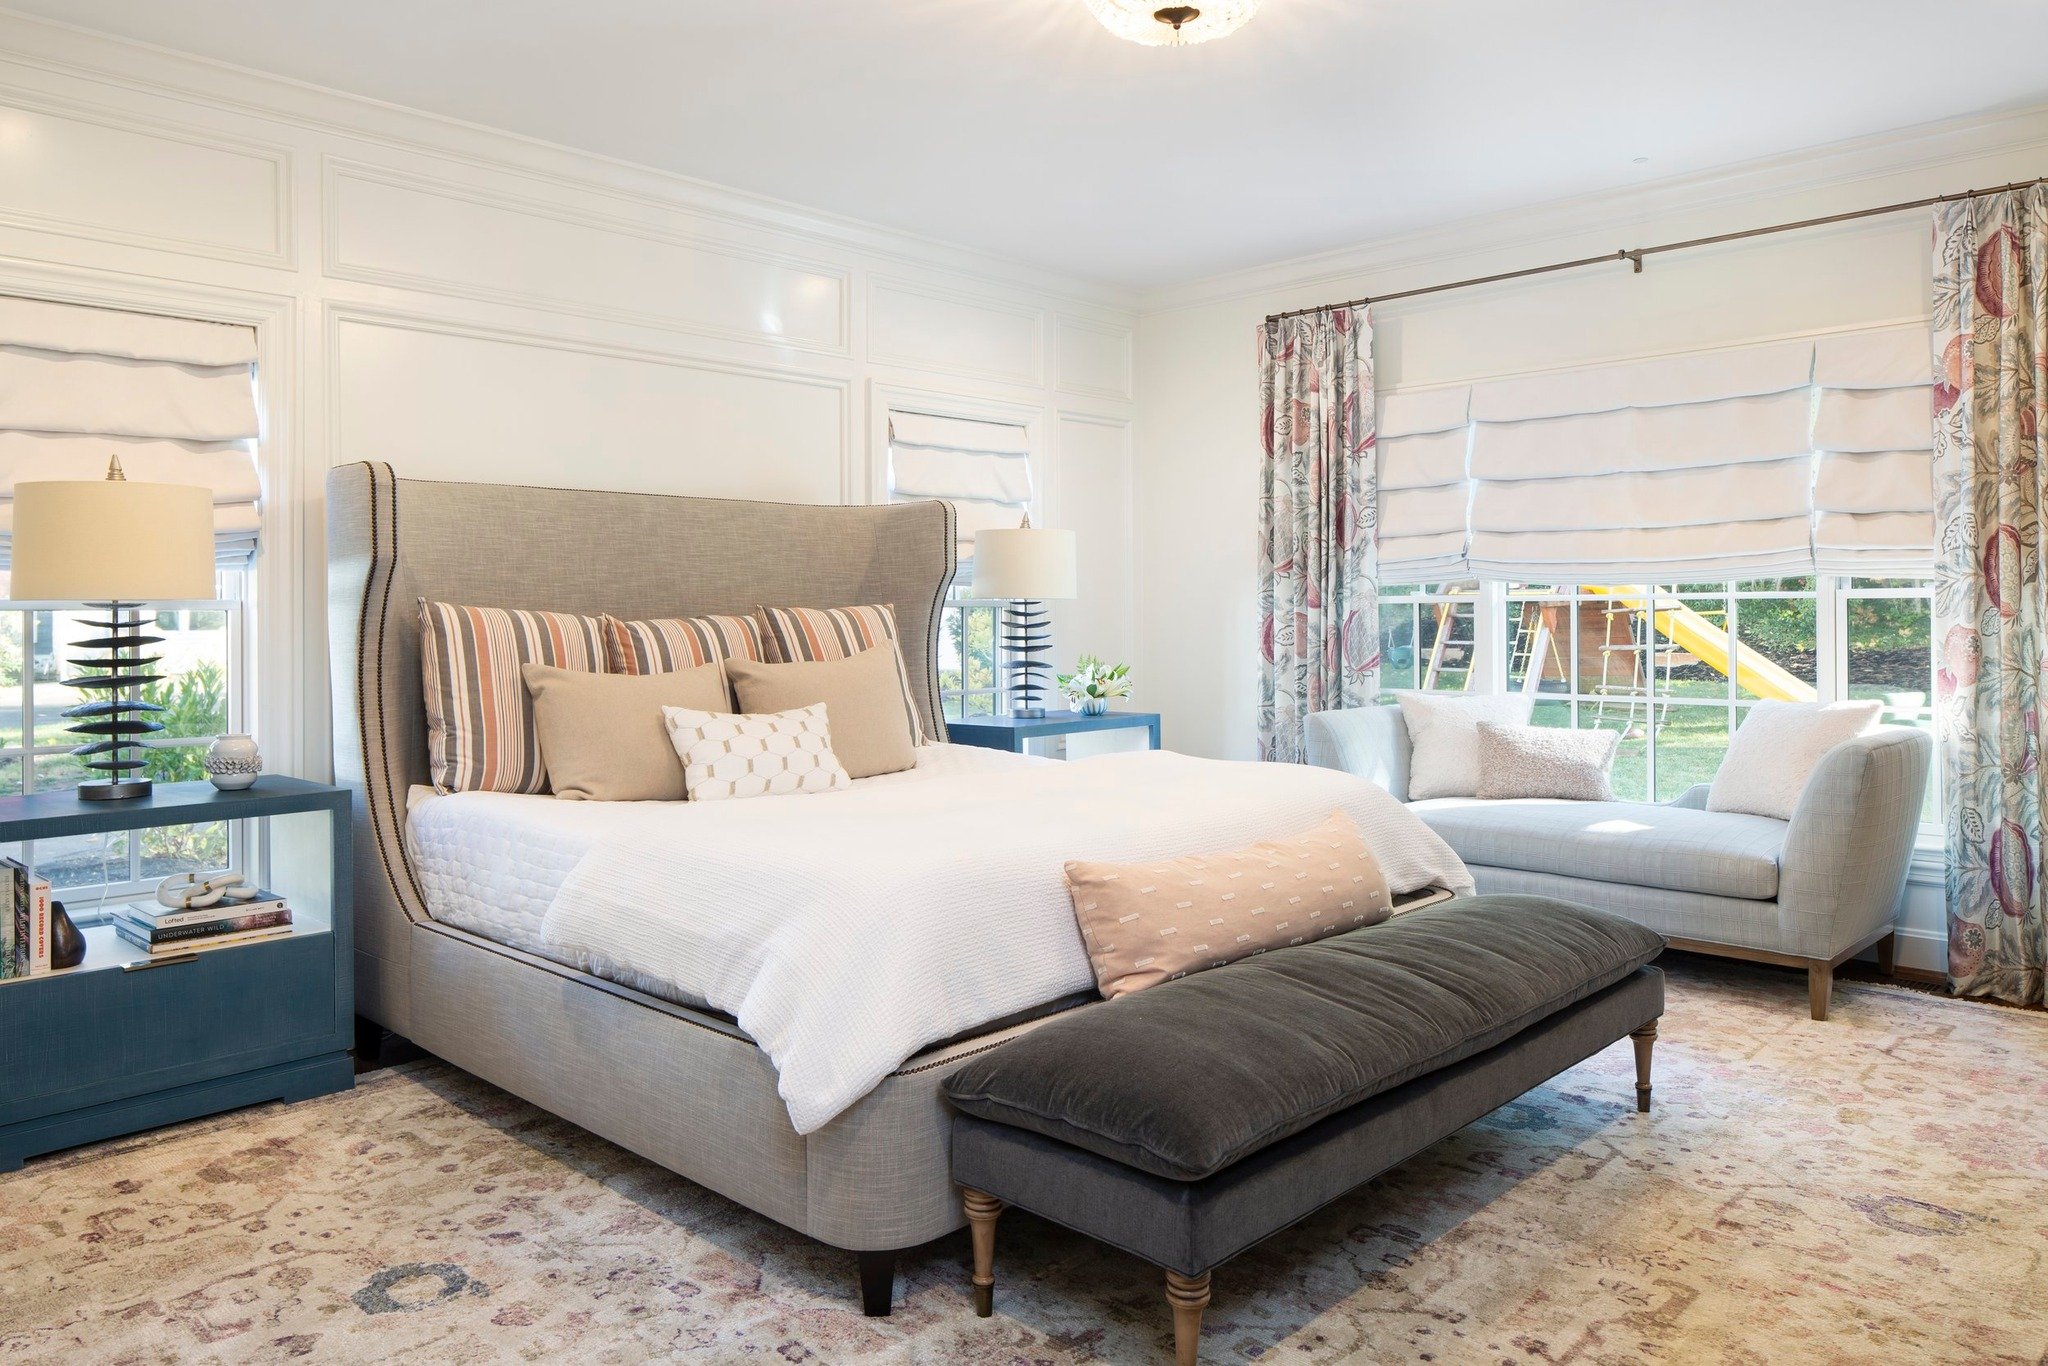 Ann knows exactly how to make a cozy, inviting bedroom. Check out this Hyde Park primary suite featuring @centuryfurniture nightstands, #SandersonFabric draperies, and @jessicacharlesfurniture upholstery! #BedroomInspo

#interiordesign #construction 